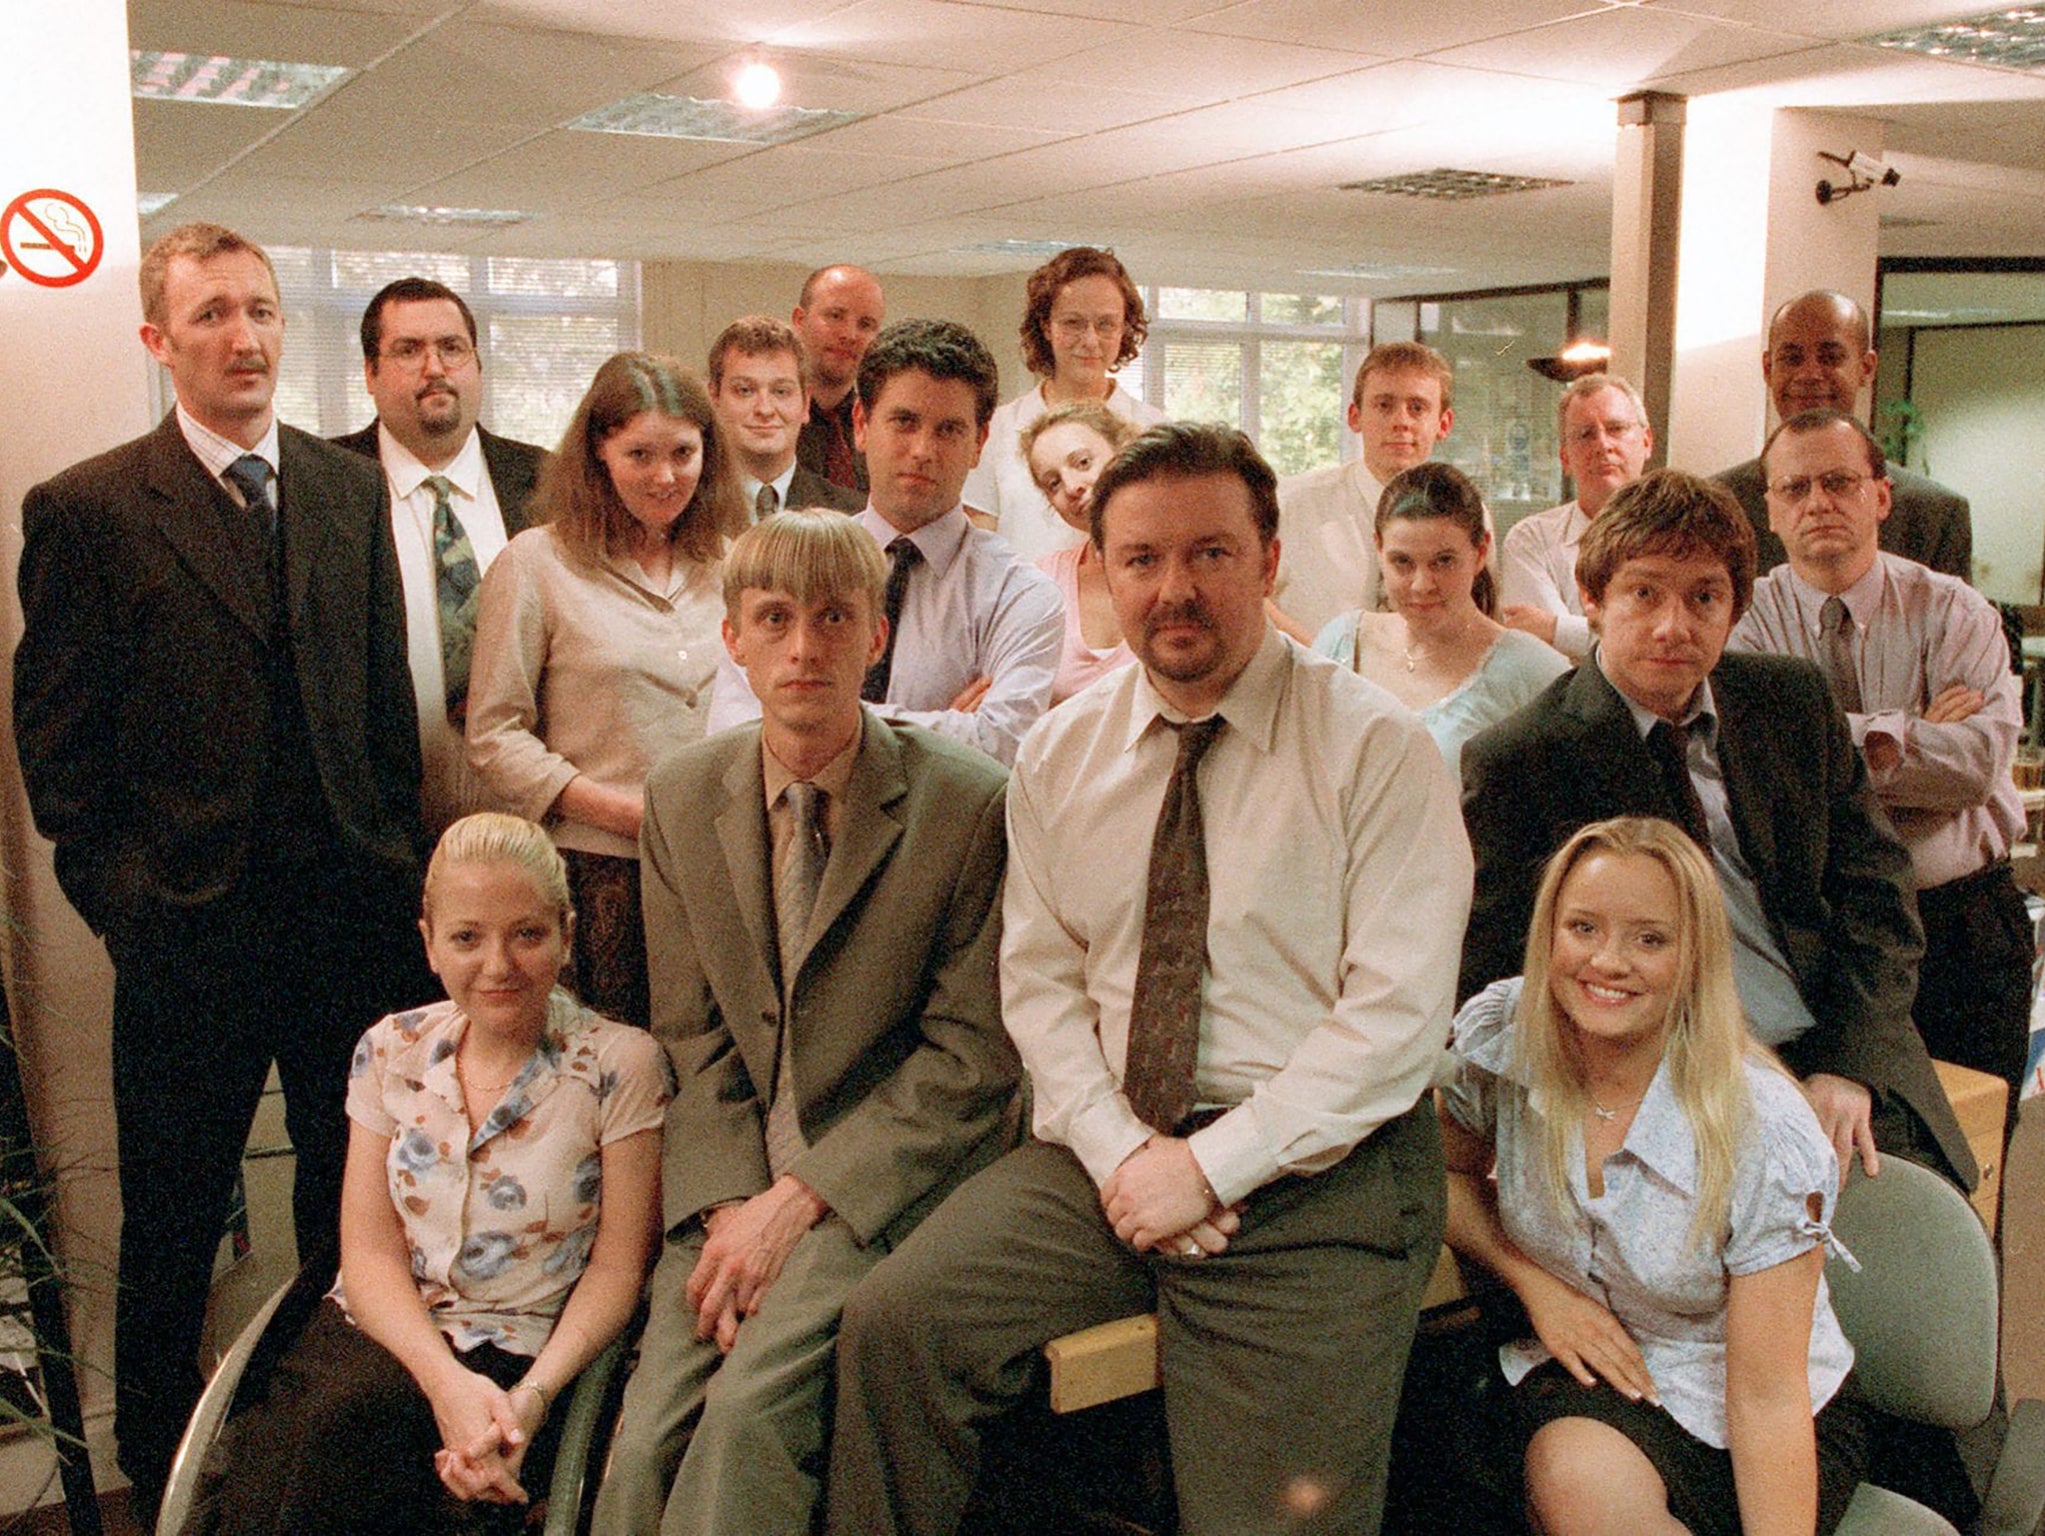 Ricky Gervais and the large ensemble cast of ‘The Office'